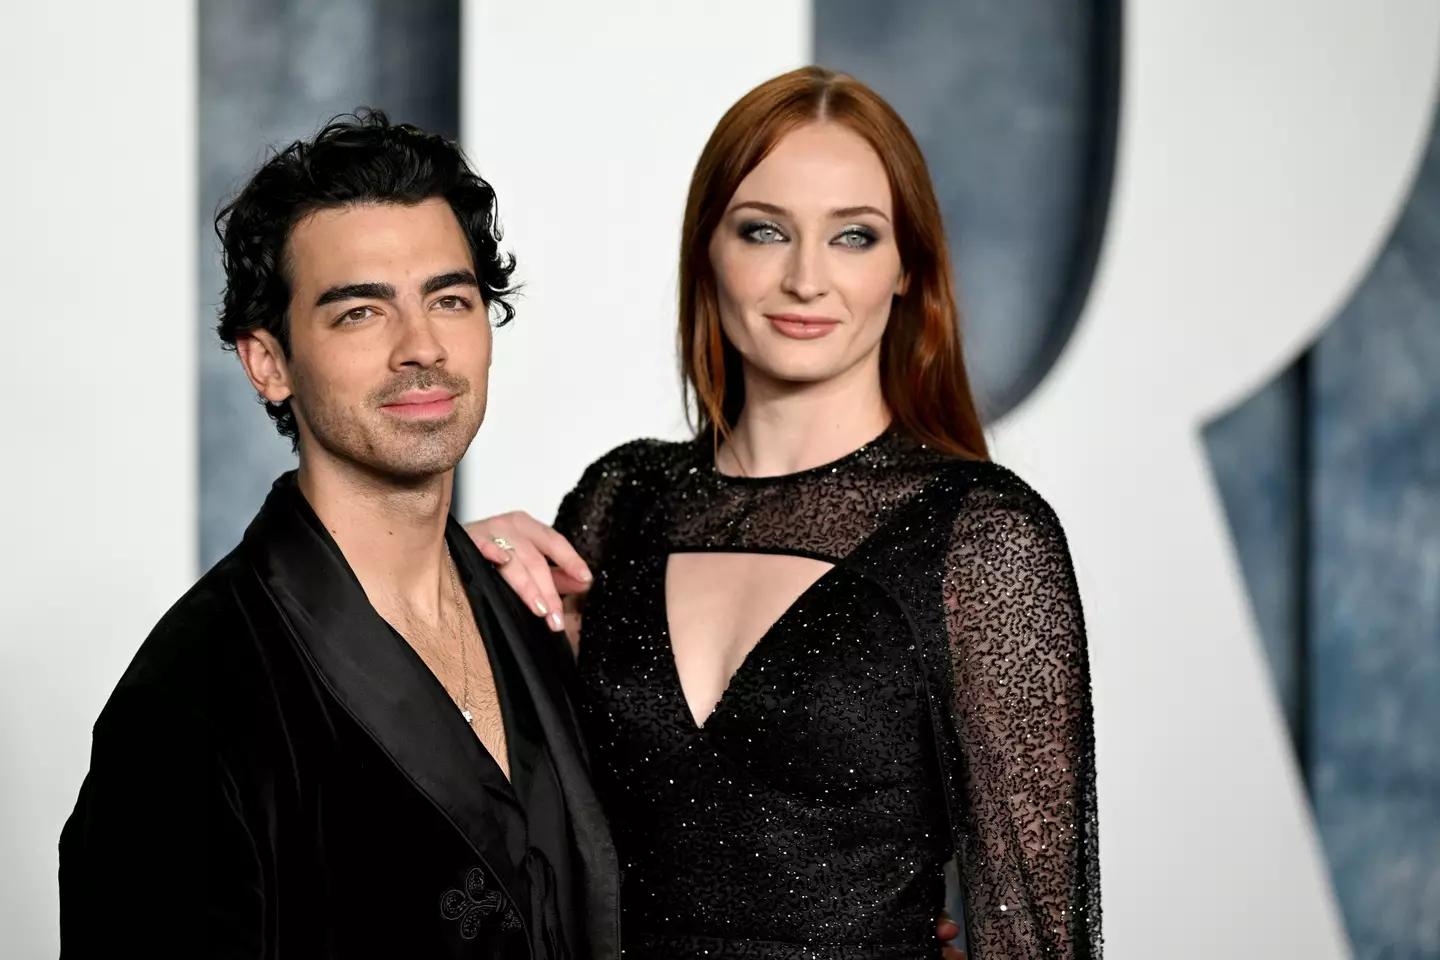 Joe Jonas and Sophie Turner were married for four years.